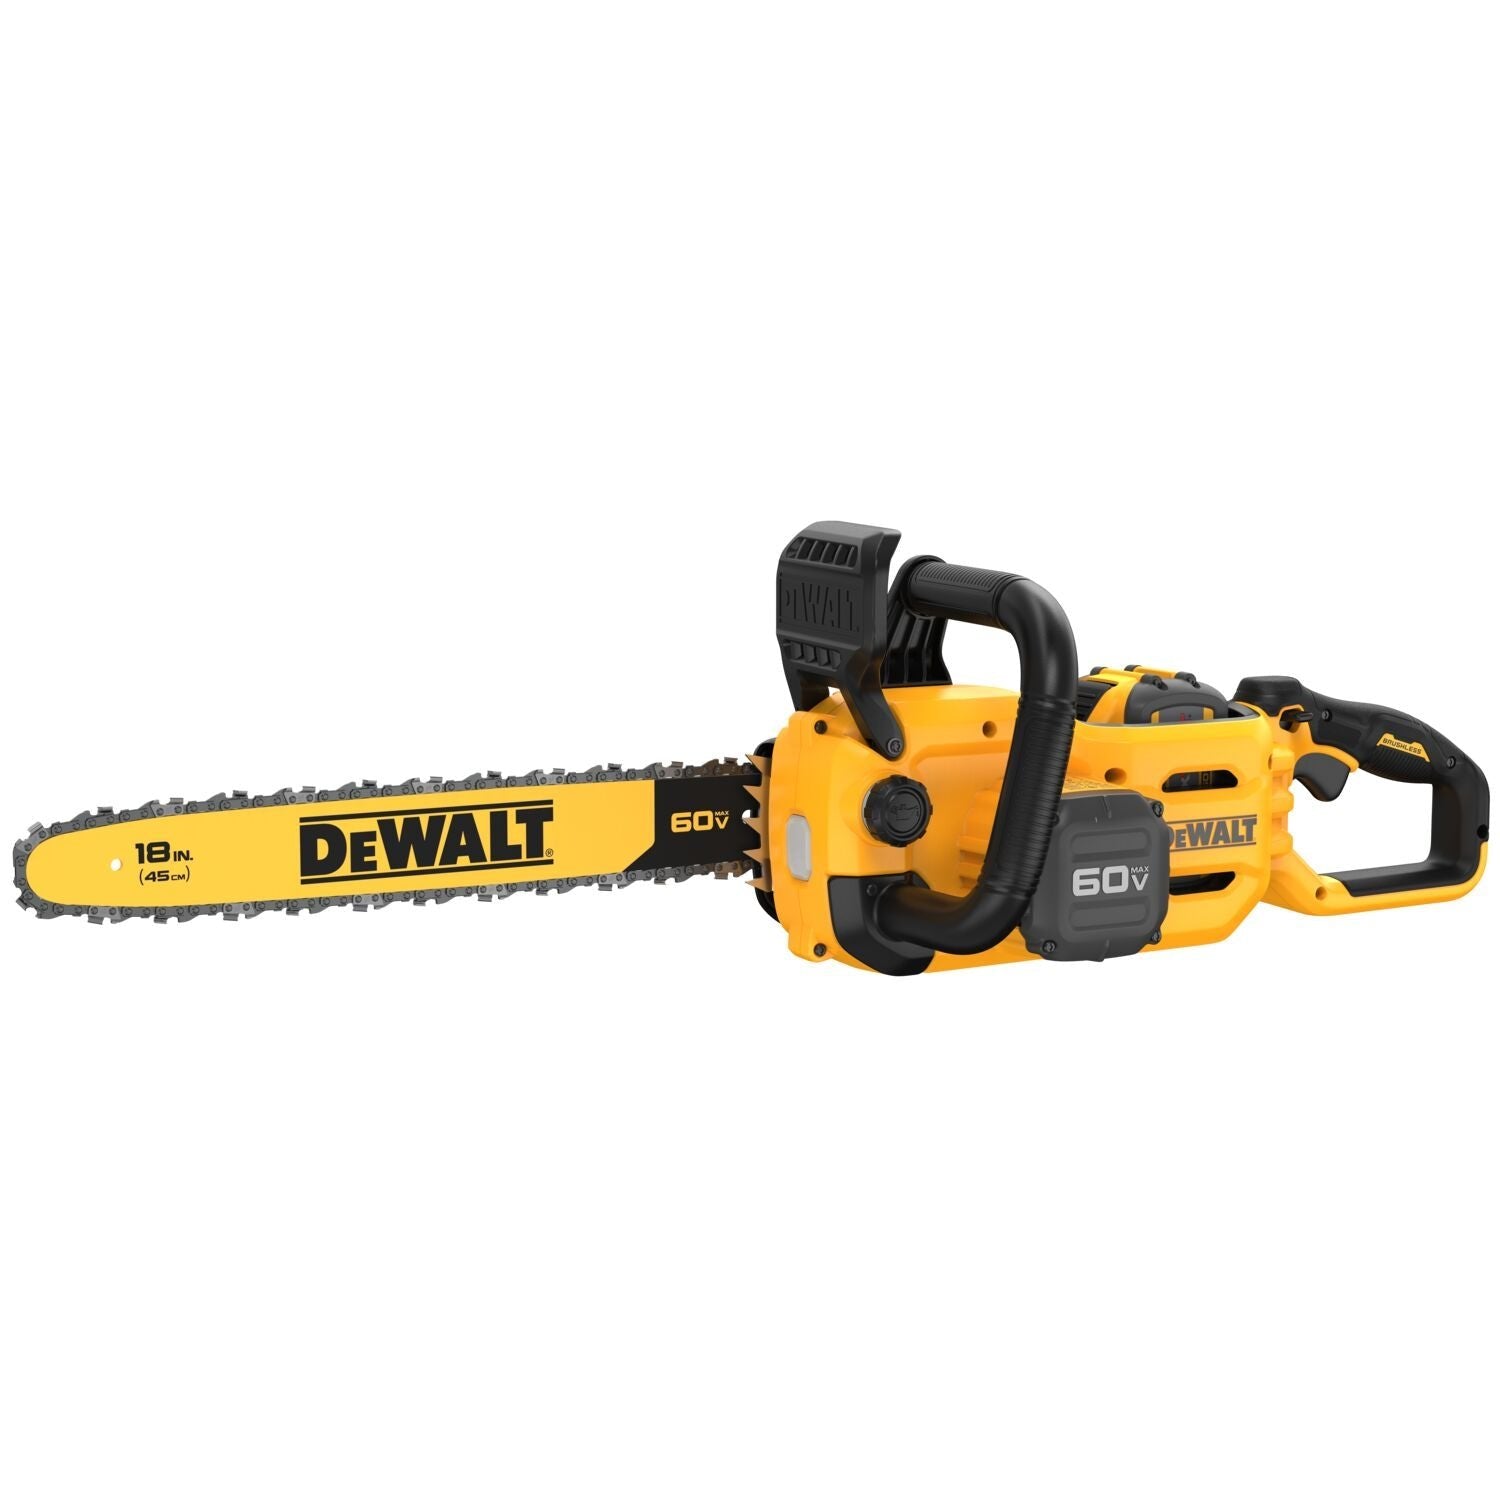 DEWALT DCCS672X1 60V MAX* 18 IN. 9.0Ah BRUSHLESS CORDLESS CHAINSAW